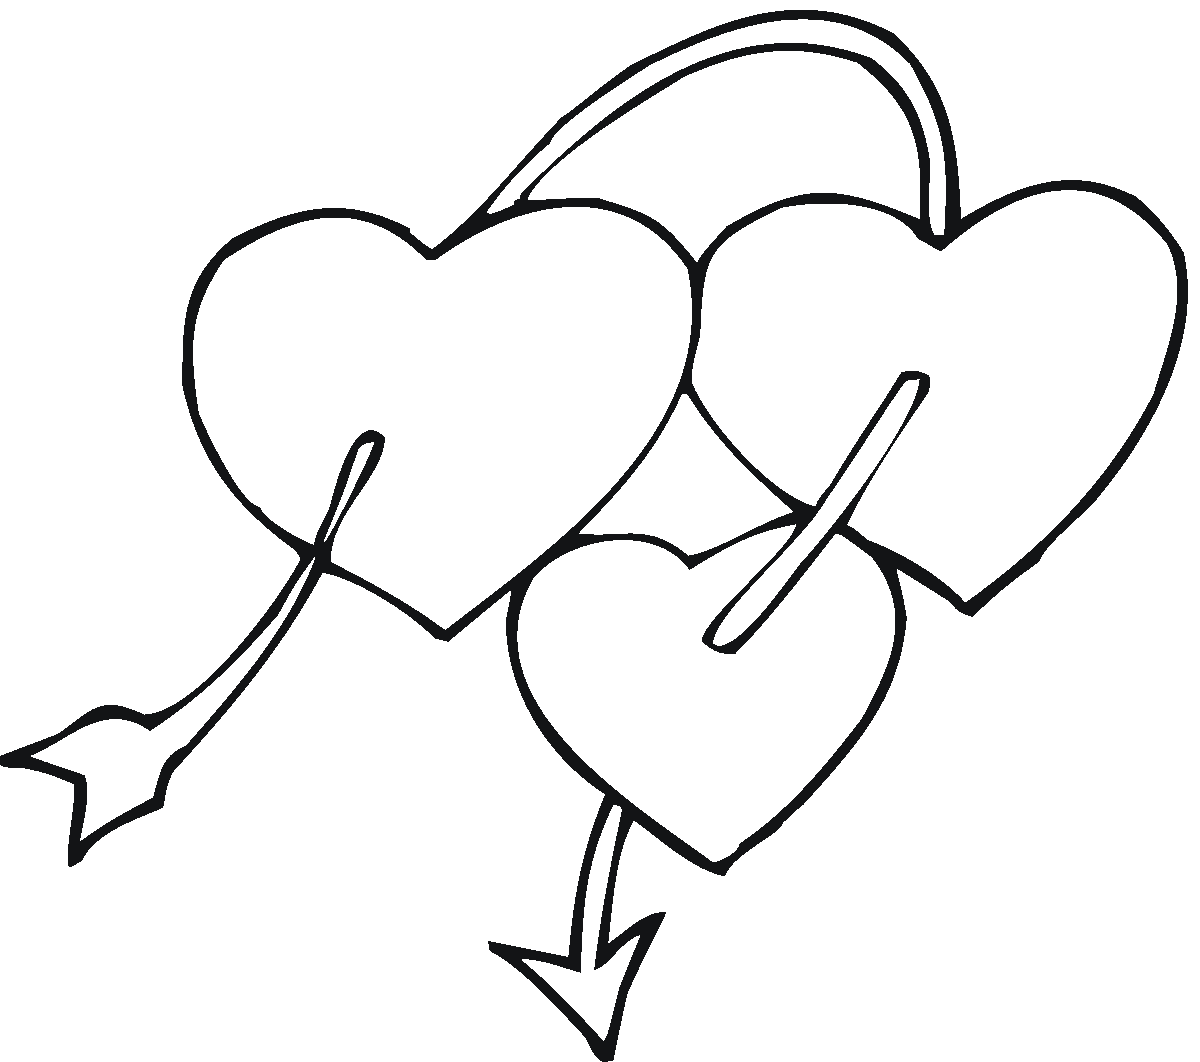 Easy Drawings Of Hearts And Love - ClipArt Best